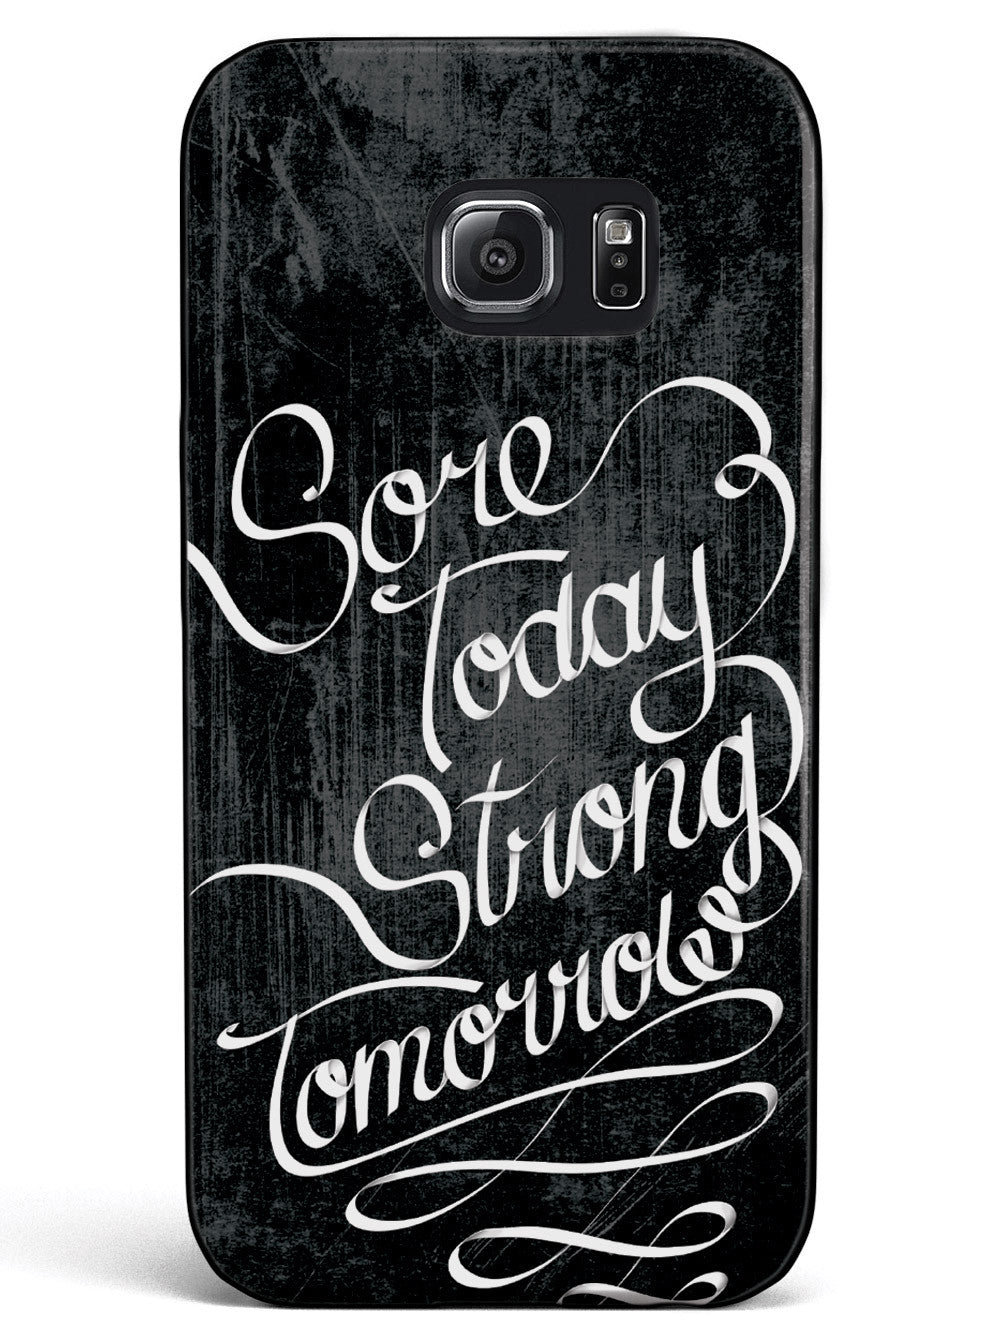 Sore Today, Strong Tomorrow - Fitness Case